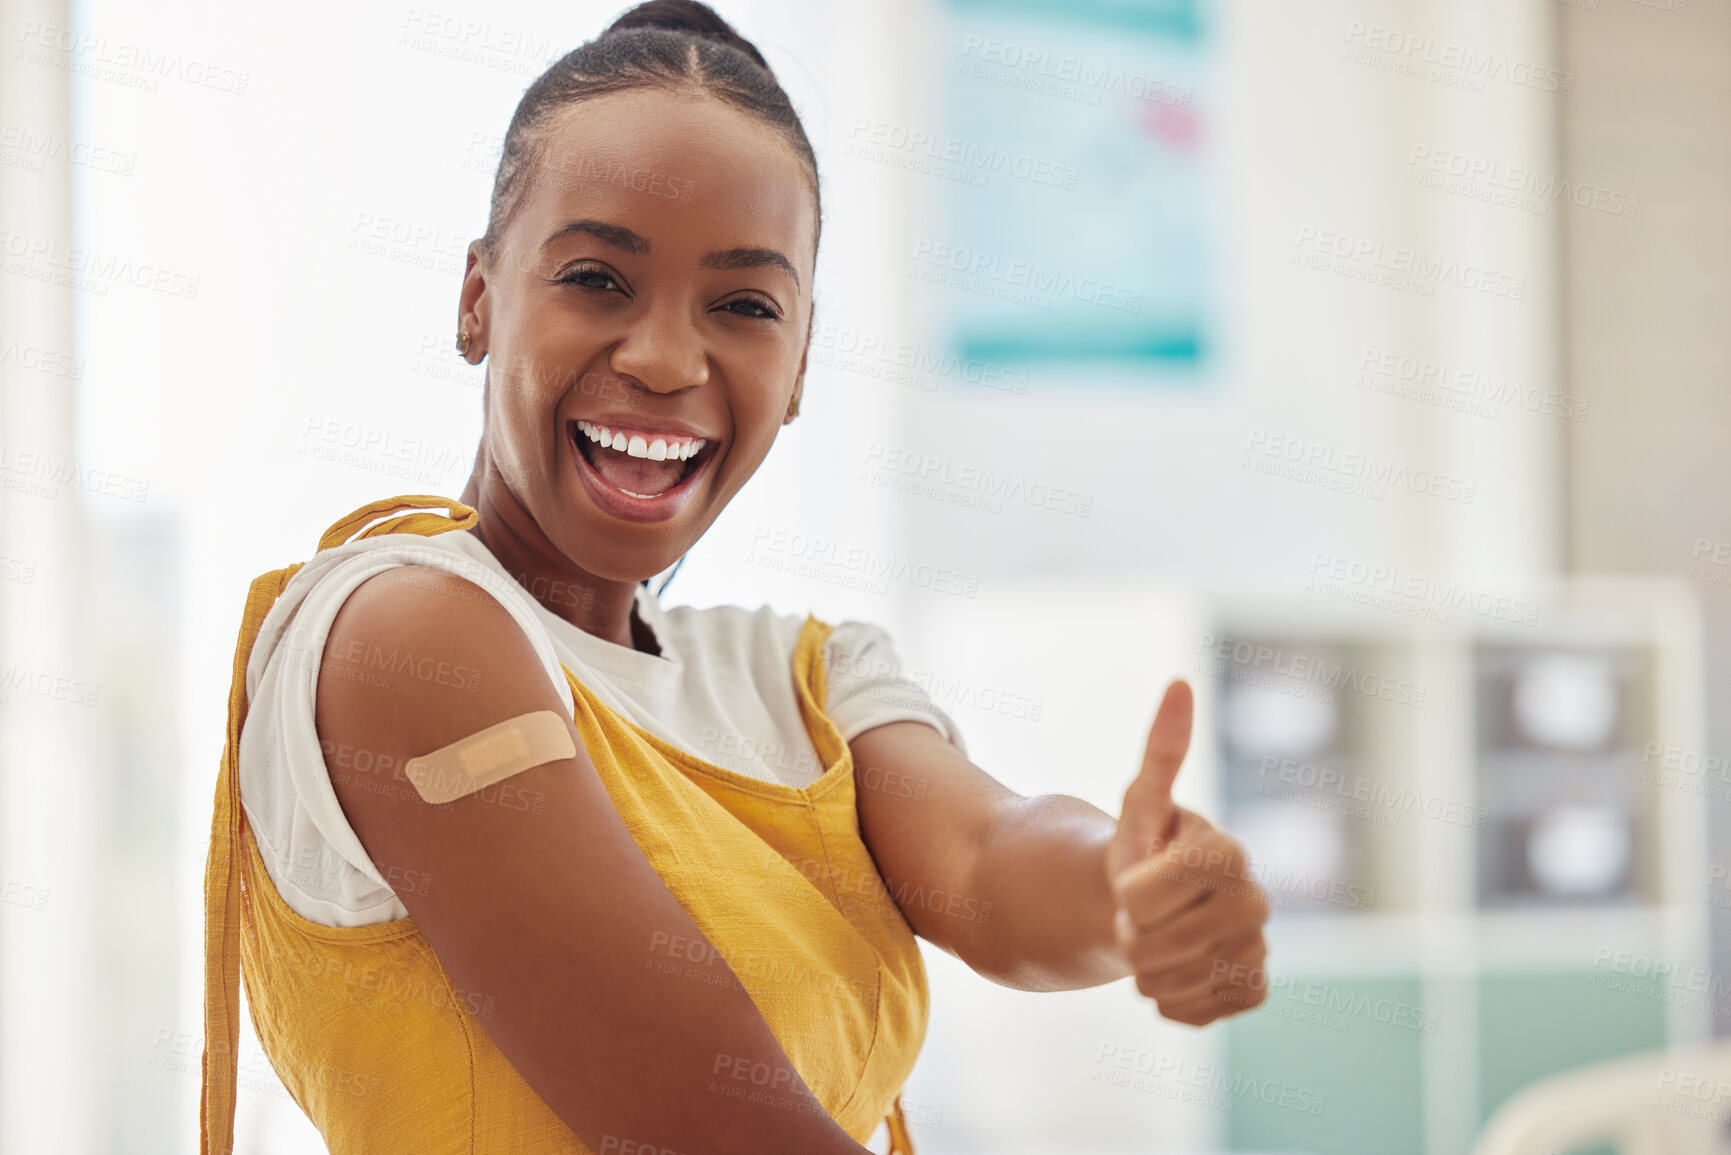 Buy stock photo Vaccine bandage, covid 19 and woman portrait with thumbs up emoji gesture for healthcare, medicine and immunity. Virus, safety first aid or African hospital patient with medical vaccination injection